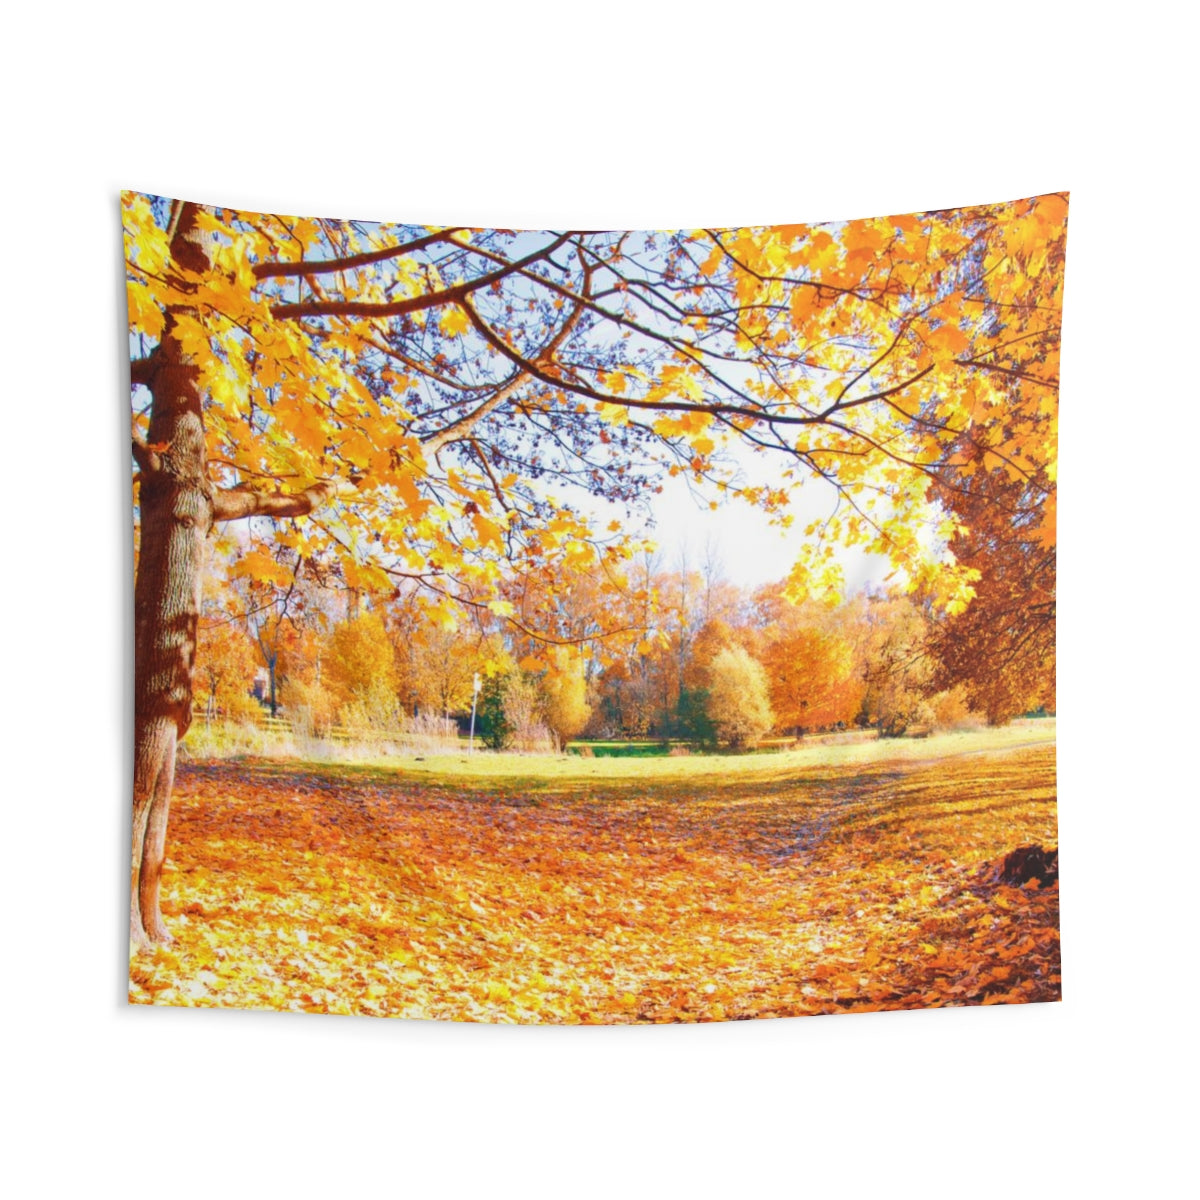 Fall Leaves Tapestry, Autumn Foliage Trees Nature Landscape Wall Aesthetic Art Hanging Large Small Decor College Dorm Room Starcove Fashion